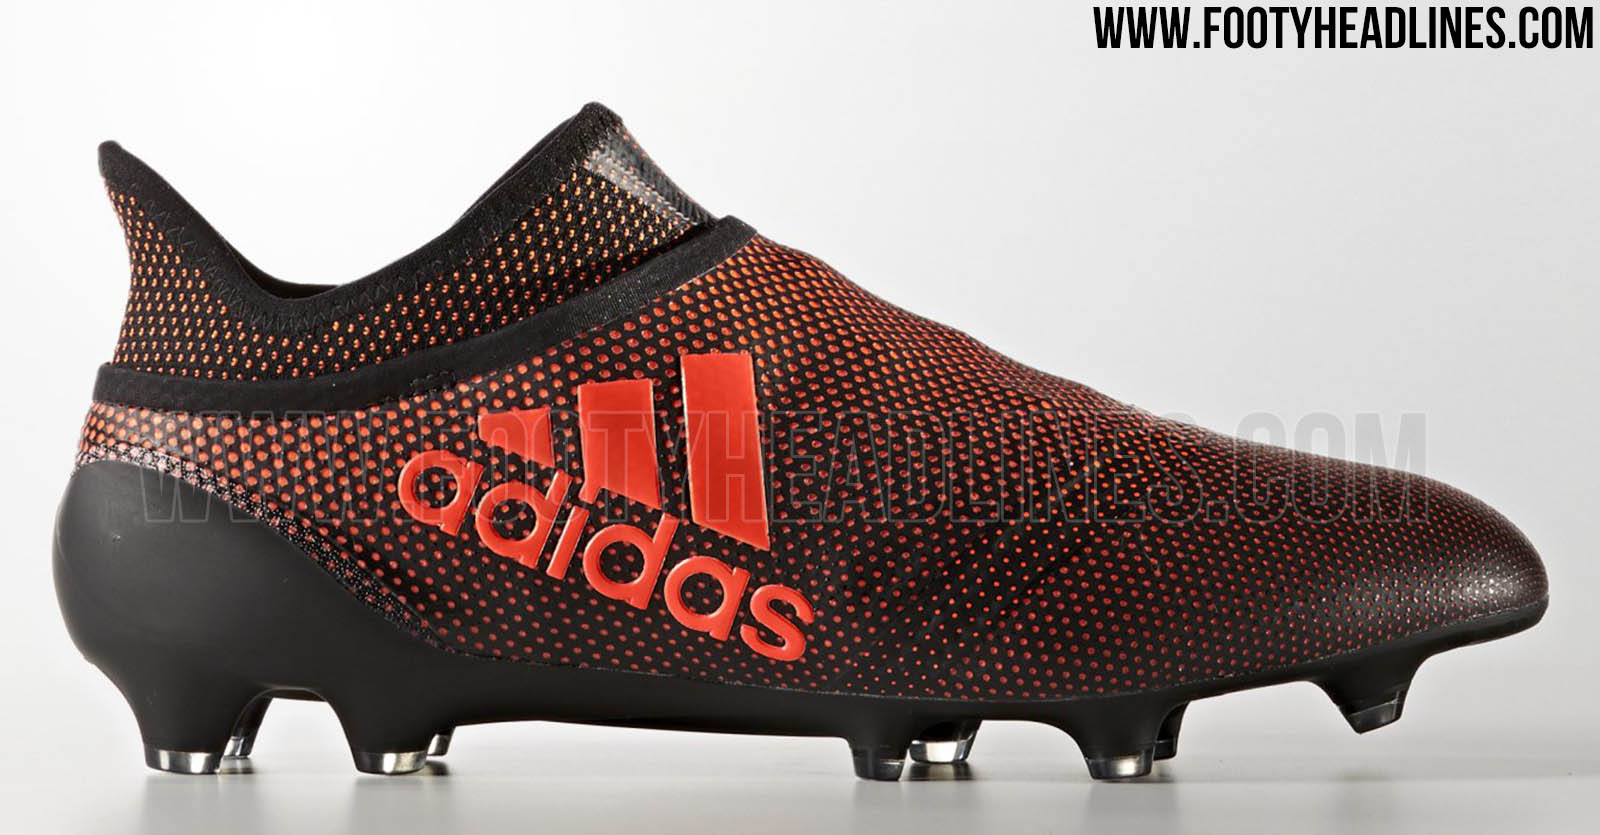 Adidas 17+ Purespeed Pyro Storm Boots Released - Footy Headlines